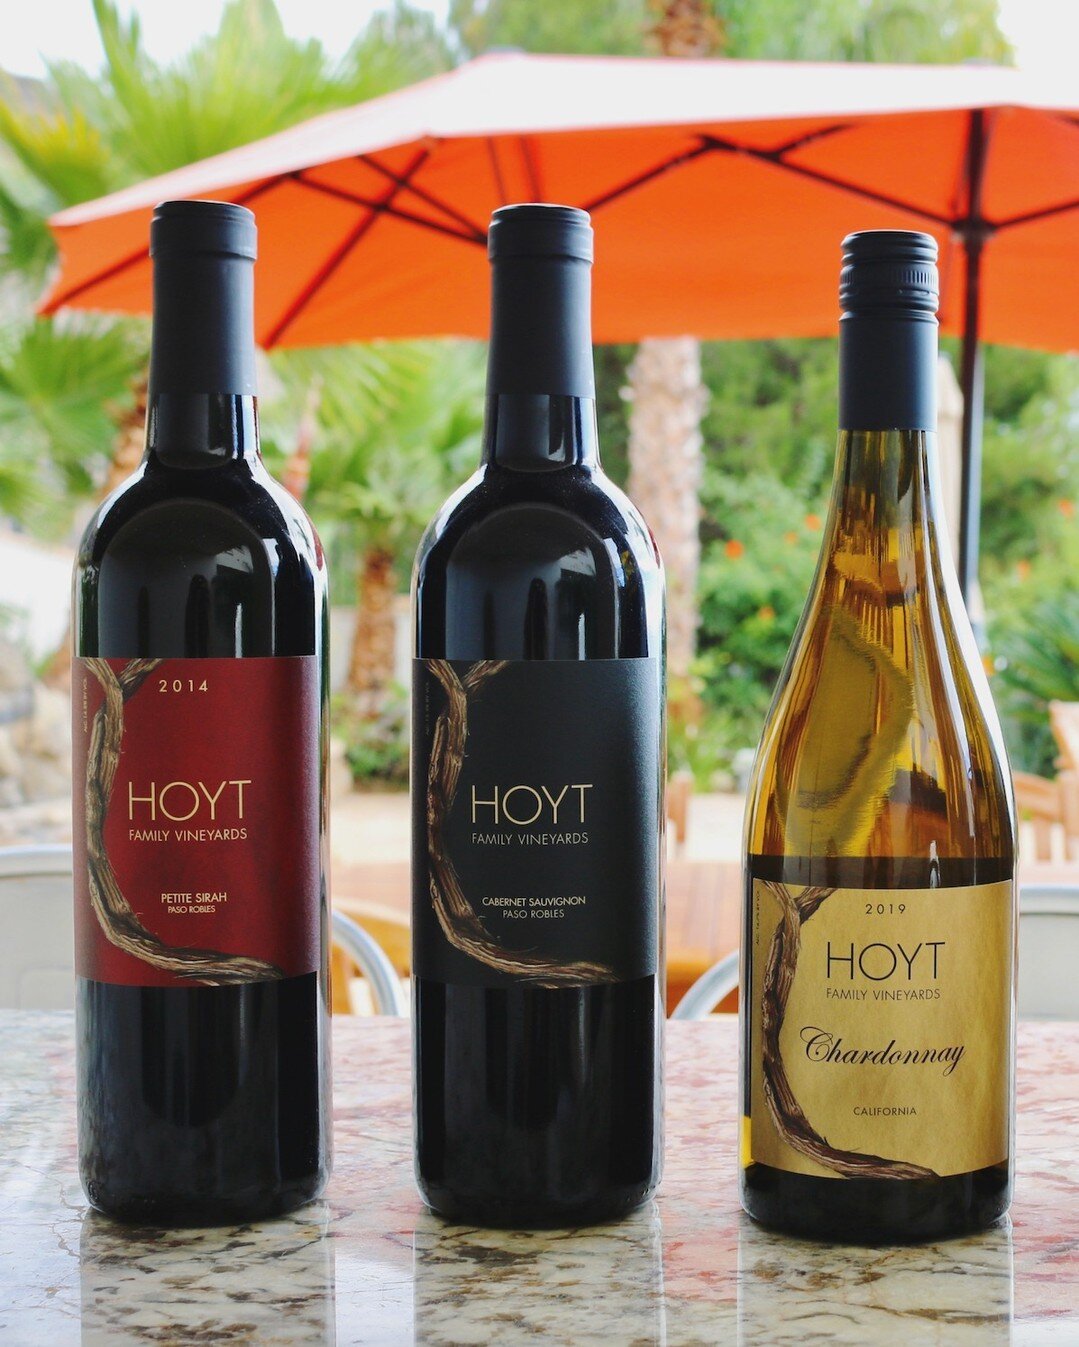 Celebrate spring by strolling around downtown Paso Robles and discover our handcrafted, estate wines. For the month of March we will be pouring our new releases paired with a tasty bite. You'll be the first to taste these vintages! 

🍷 March 7-10:  